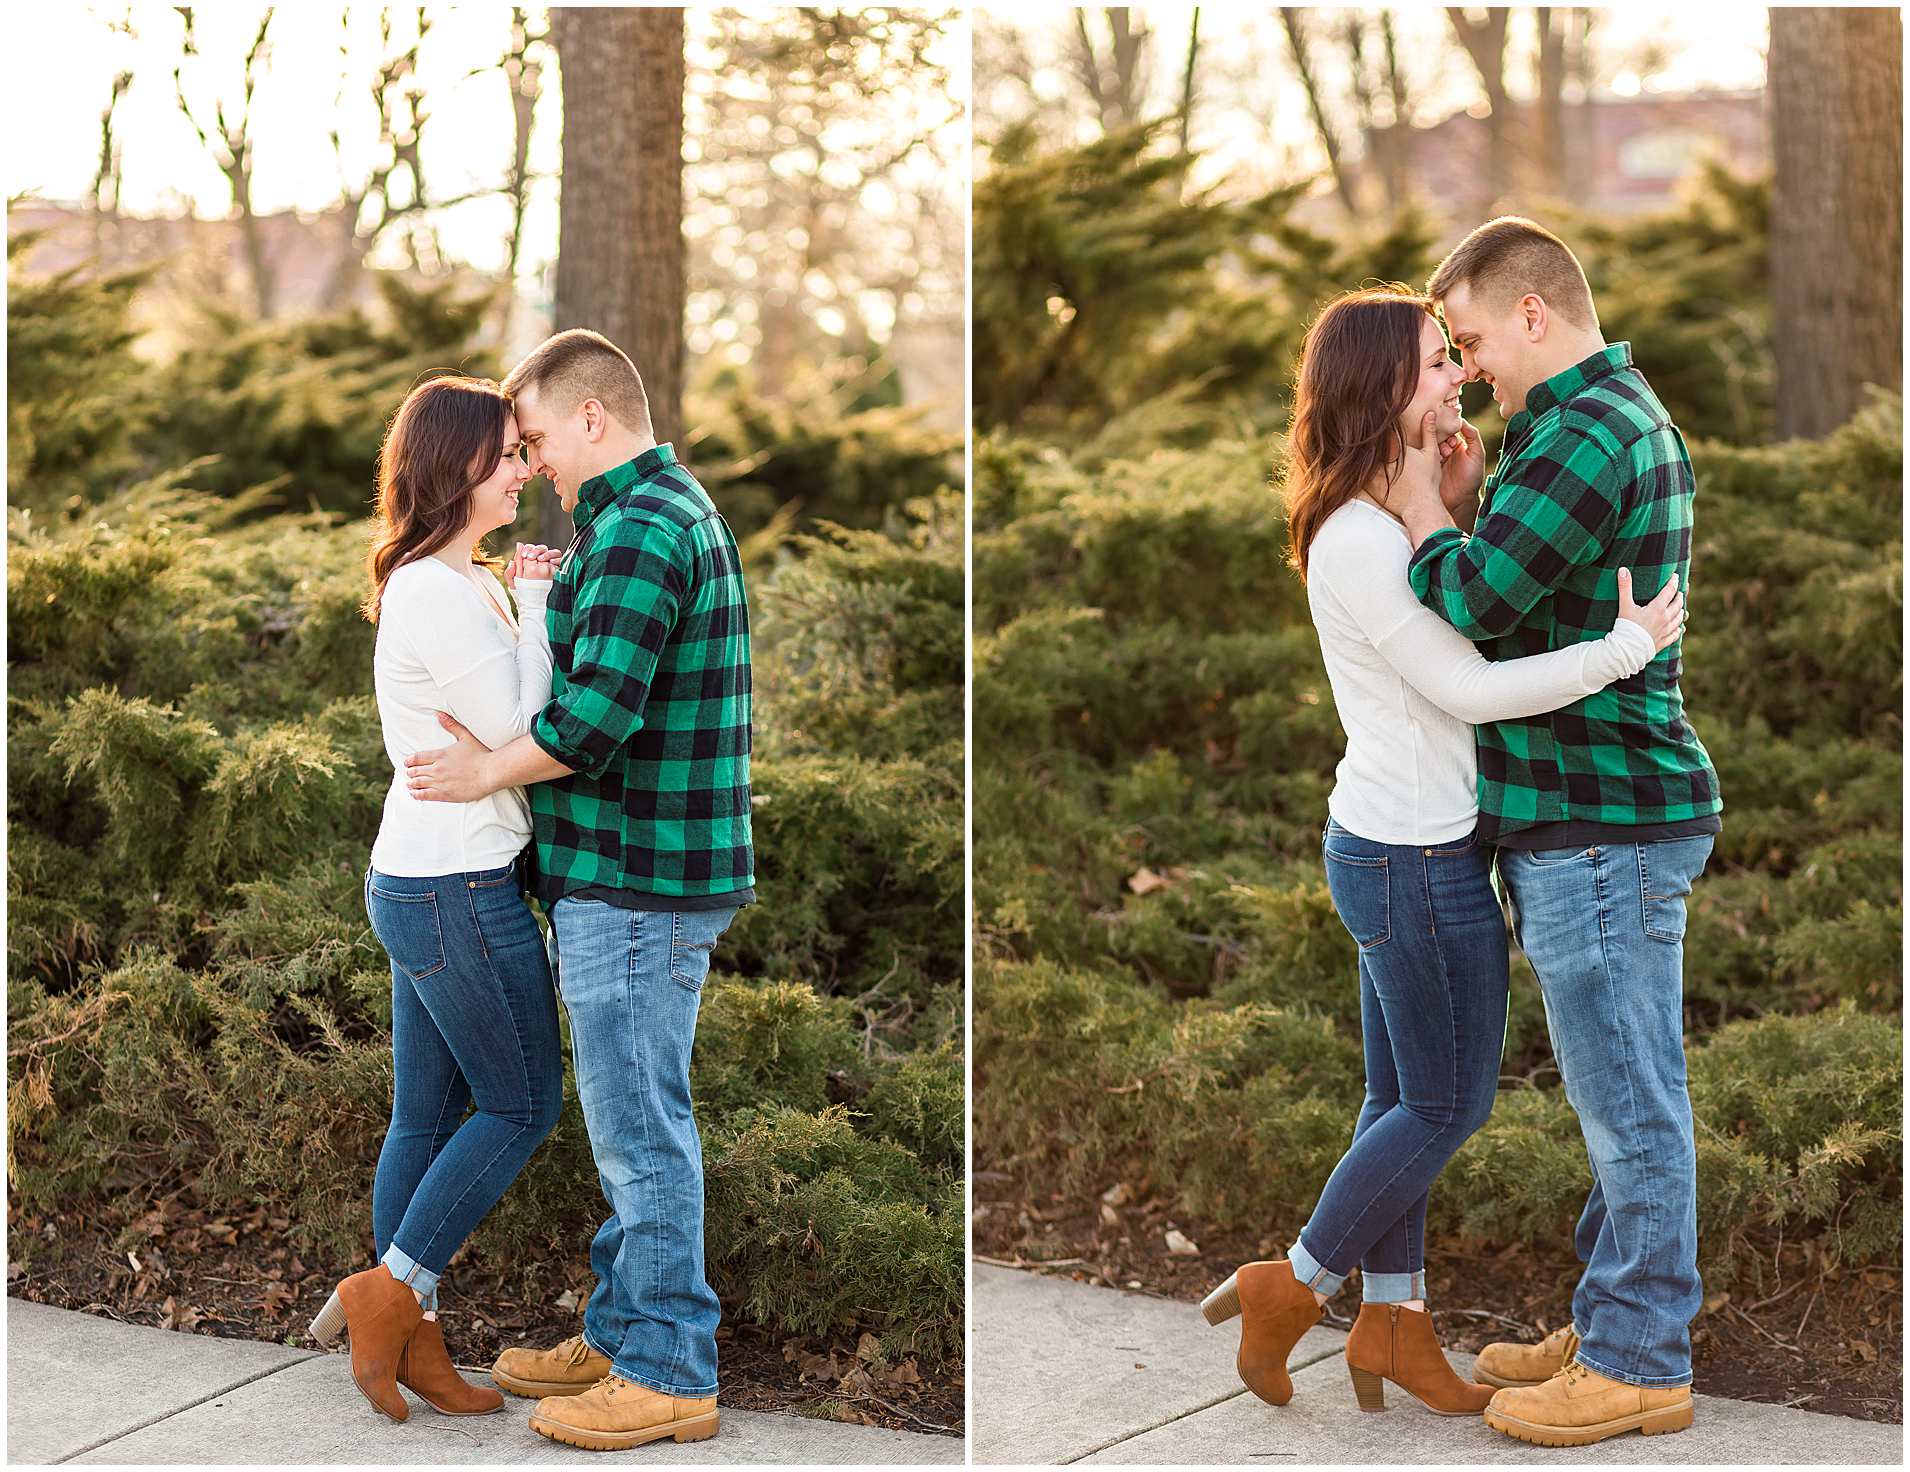 Downtown-Wilmette-Illinois-Engagement-Photos-Spring-Photography-Session